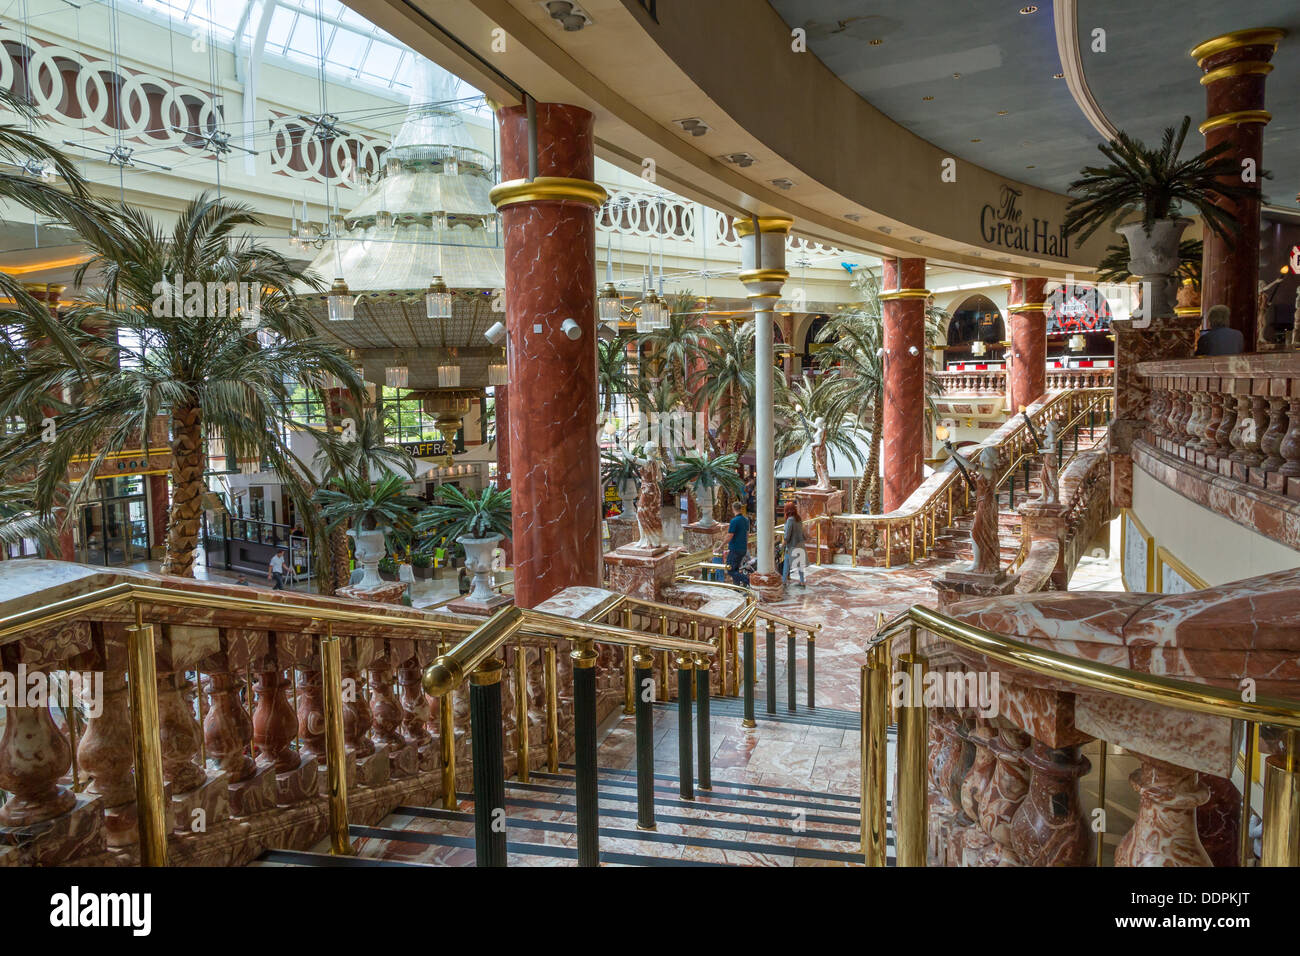 The marble staircase in The Great Hall at Into Trafford Centre, Manchester, England. Stock Photo